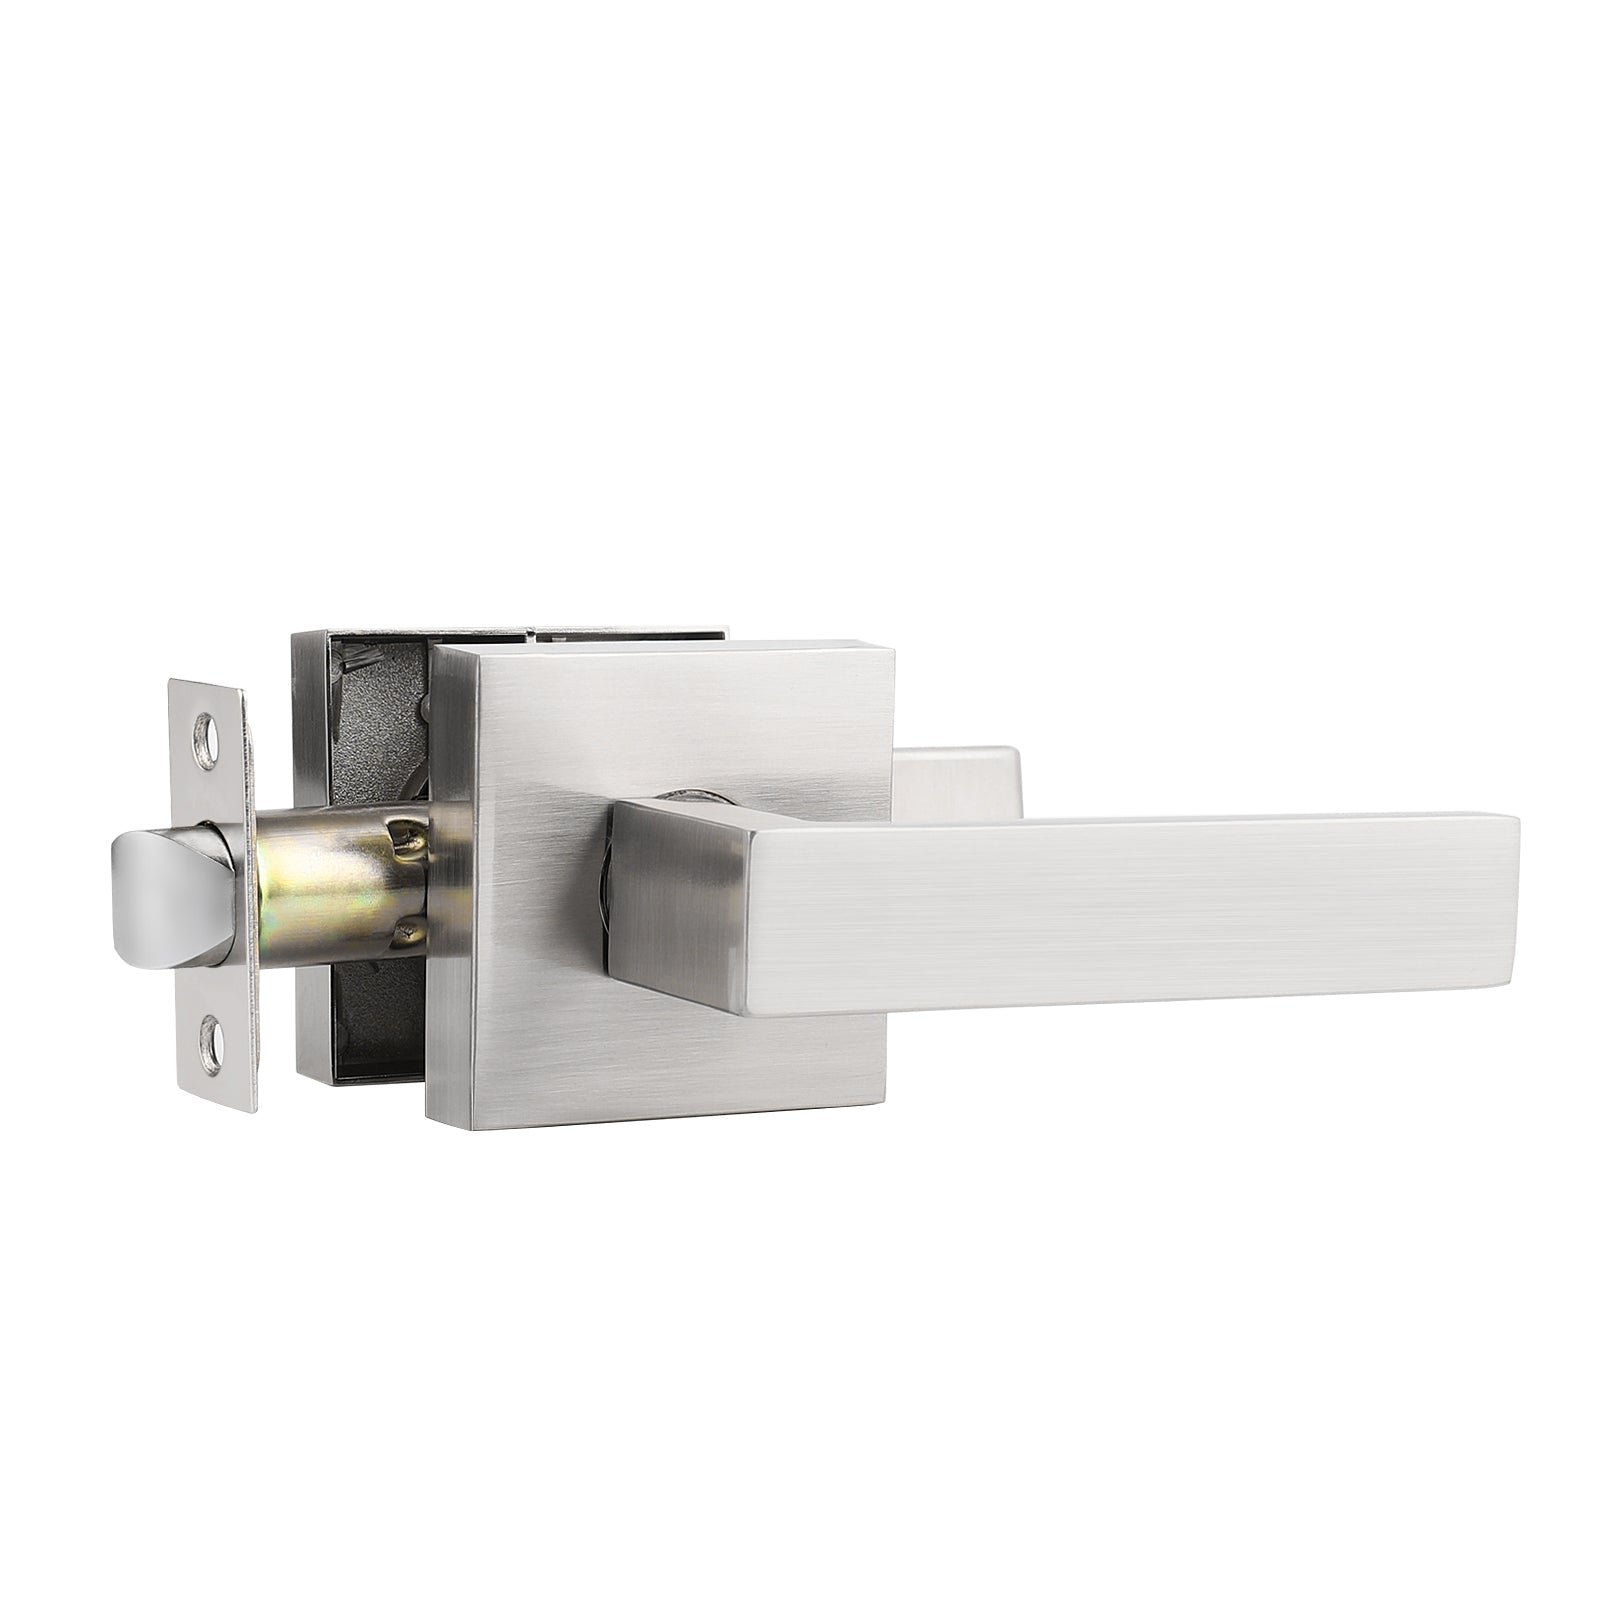 Satin Nickel Passage Door Lever Set with Square Rosette, No Key DL01SNPS